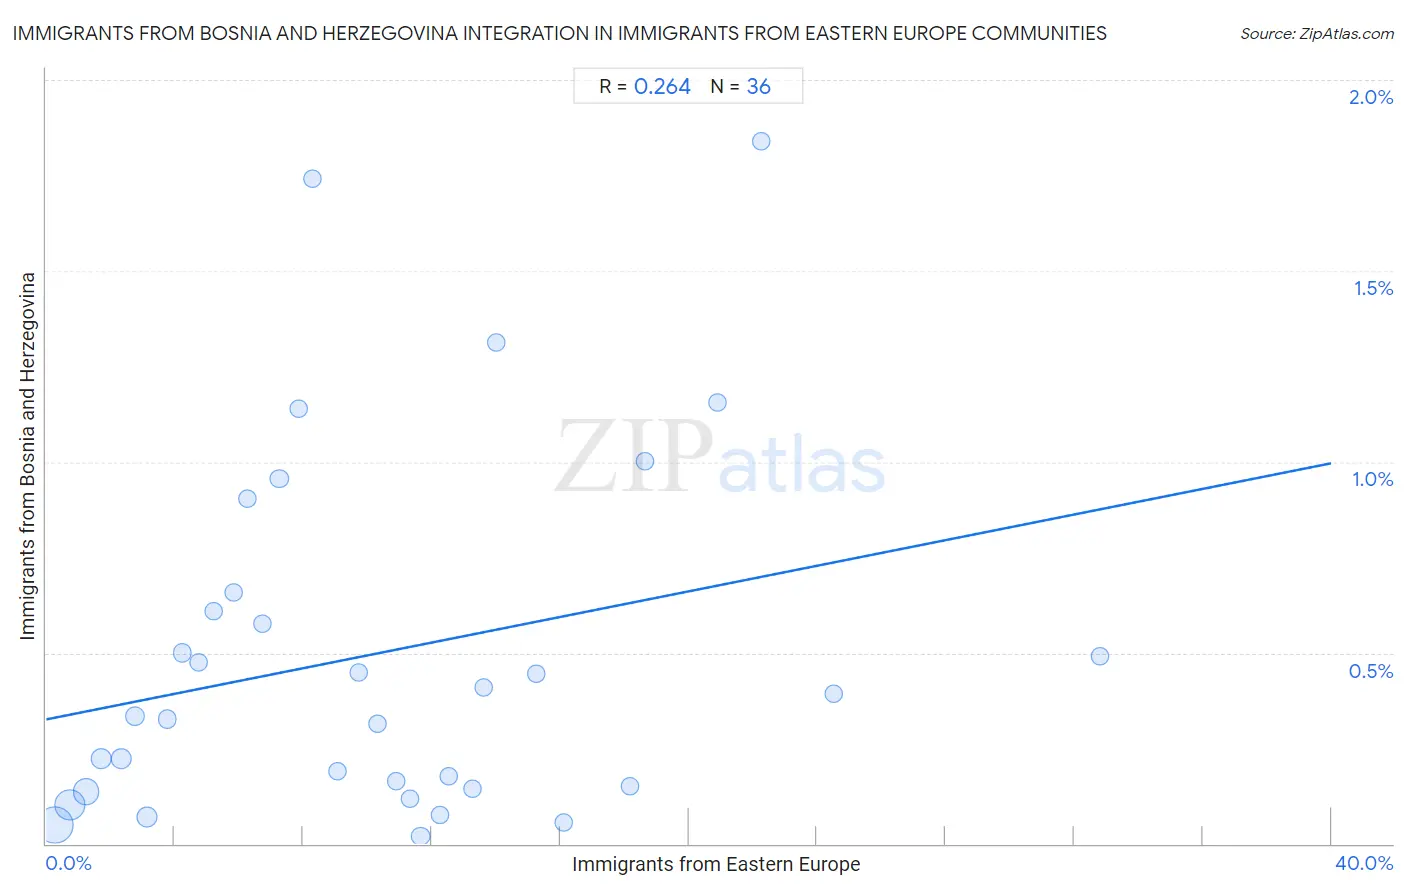 Immigrants from Eastern Europe Integration in Immigrants from Bosnia and Herzegovina Communities